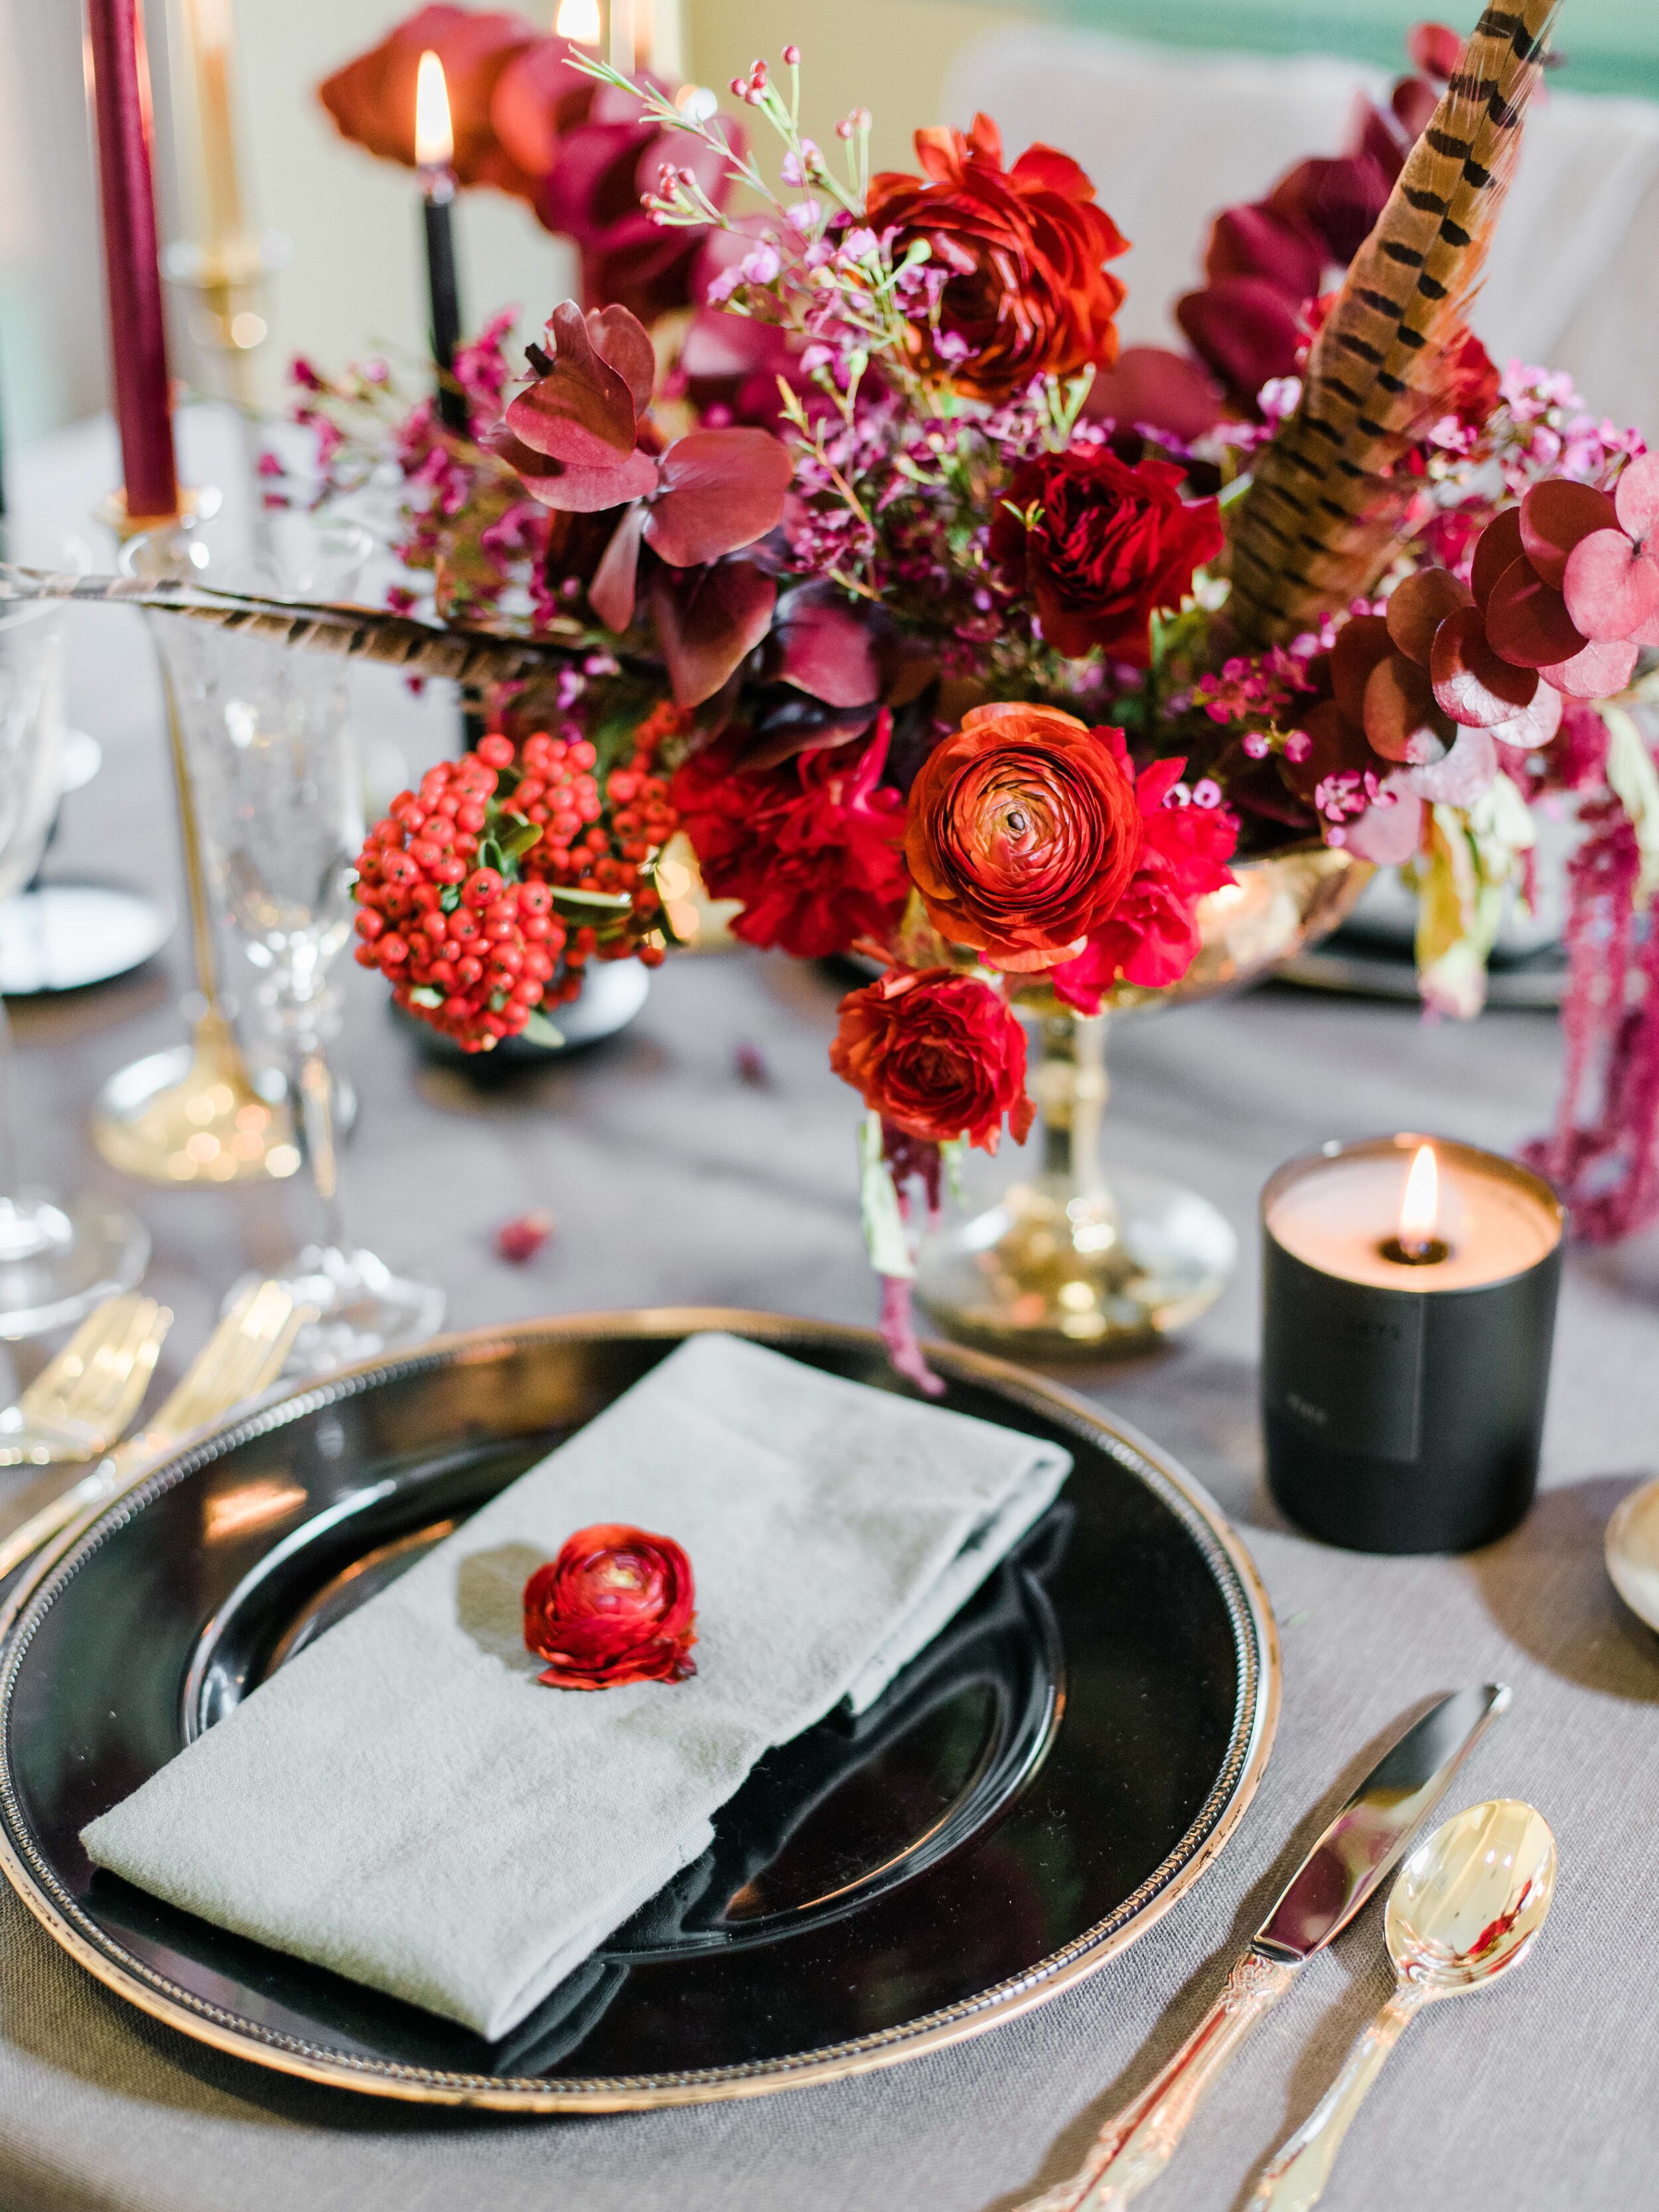 7 easy ways to plan sustainable wedding food_Table Settings_Wedding_Red